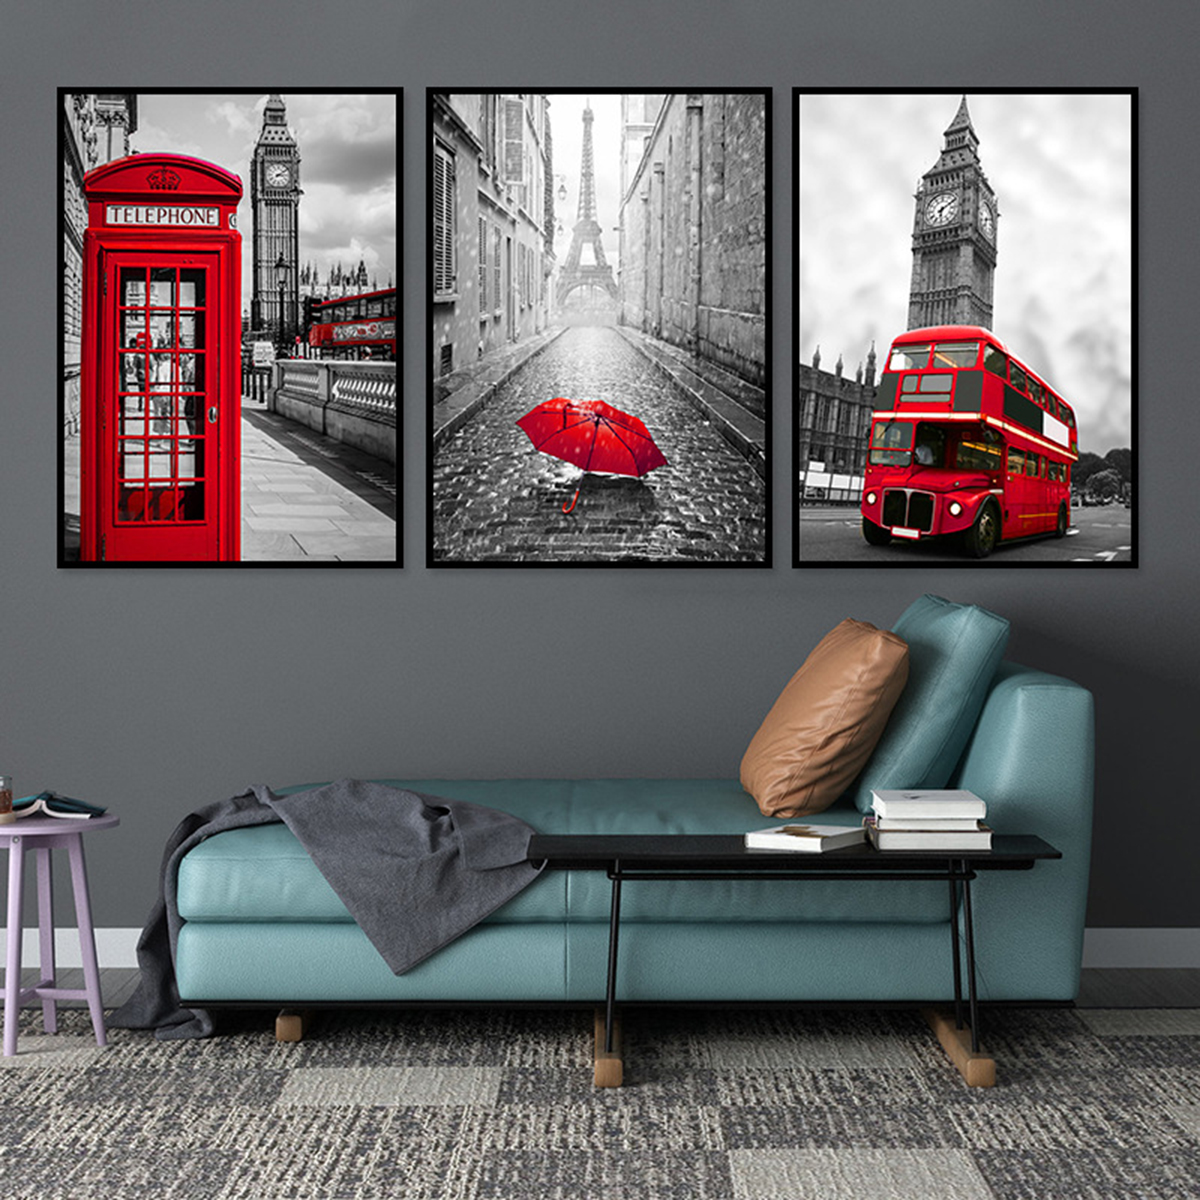 3Pcs-City-Scenery-Canvas-Paintings-Wall-Decorative-Print-Art-Pictures-Unframed-Wall-Hanging-Home-Off-1783981-10